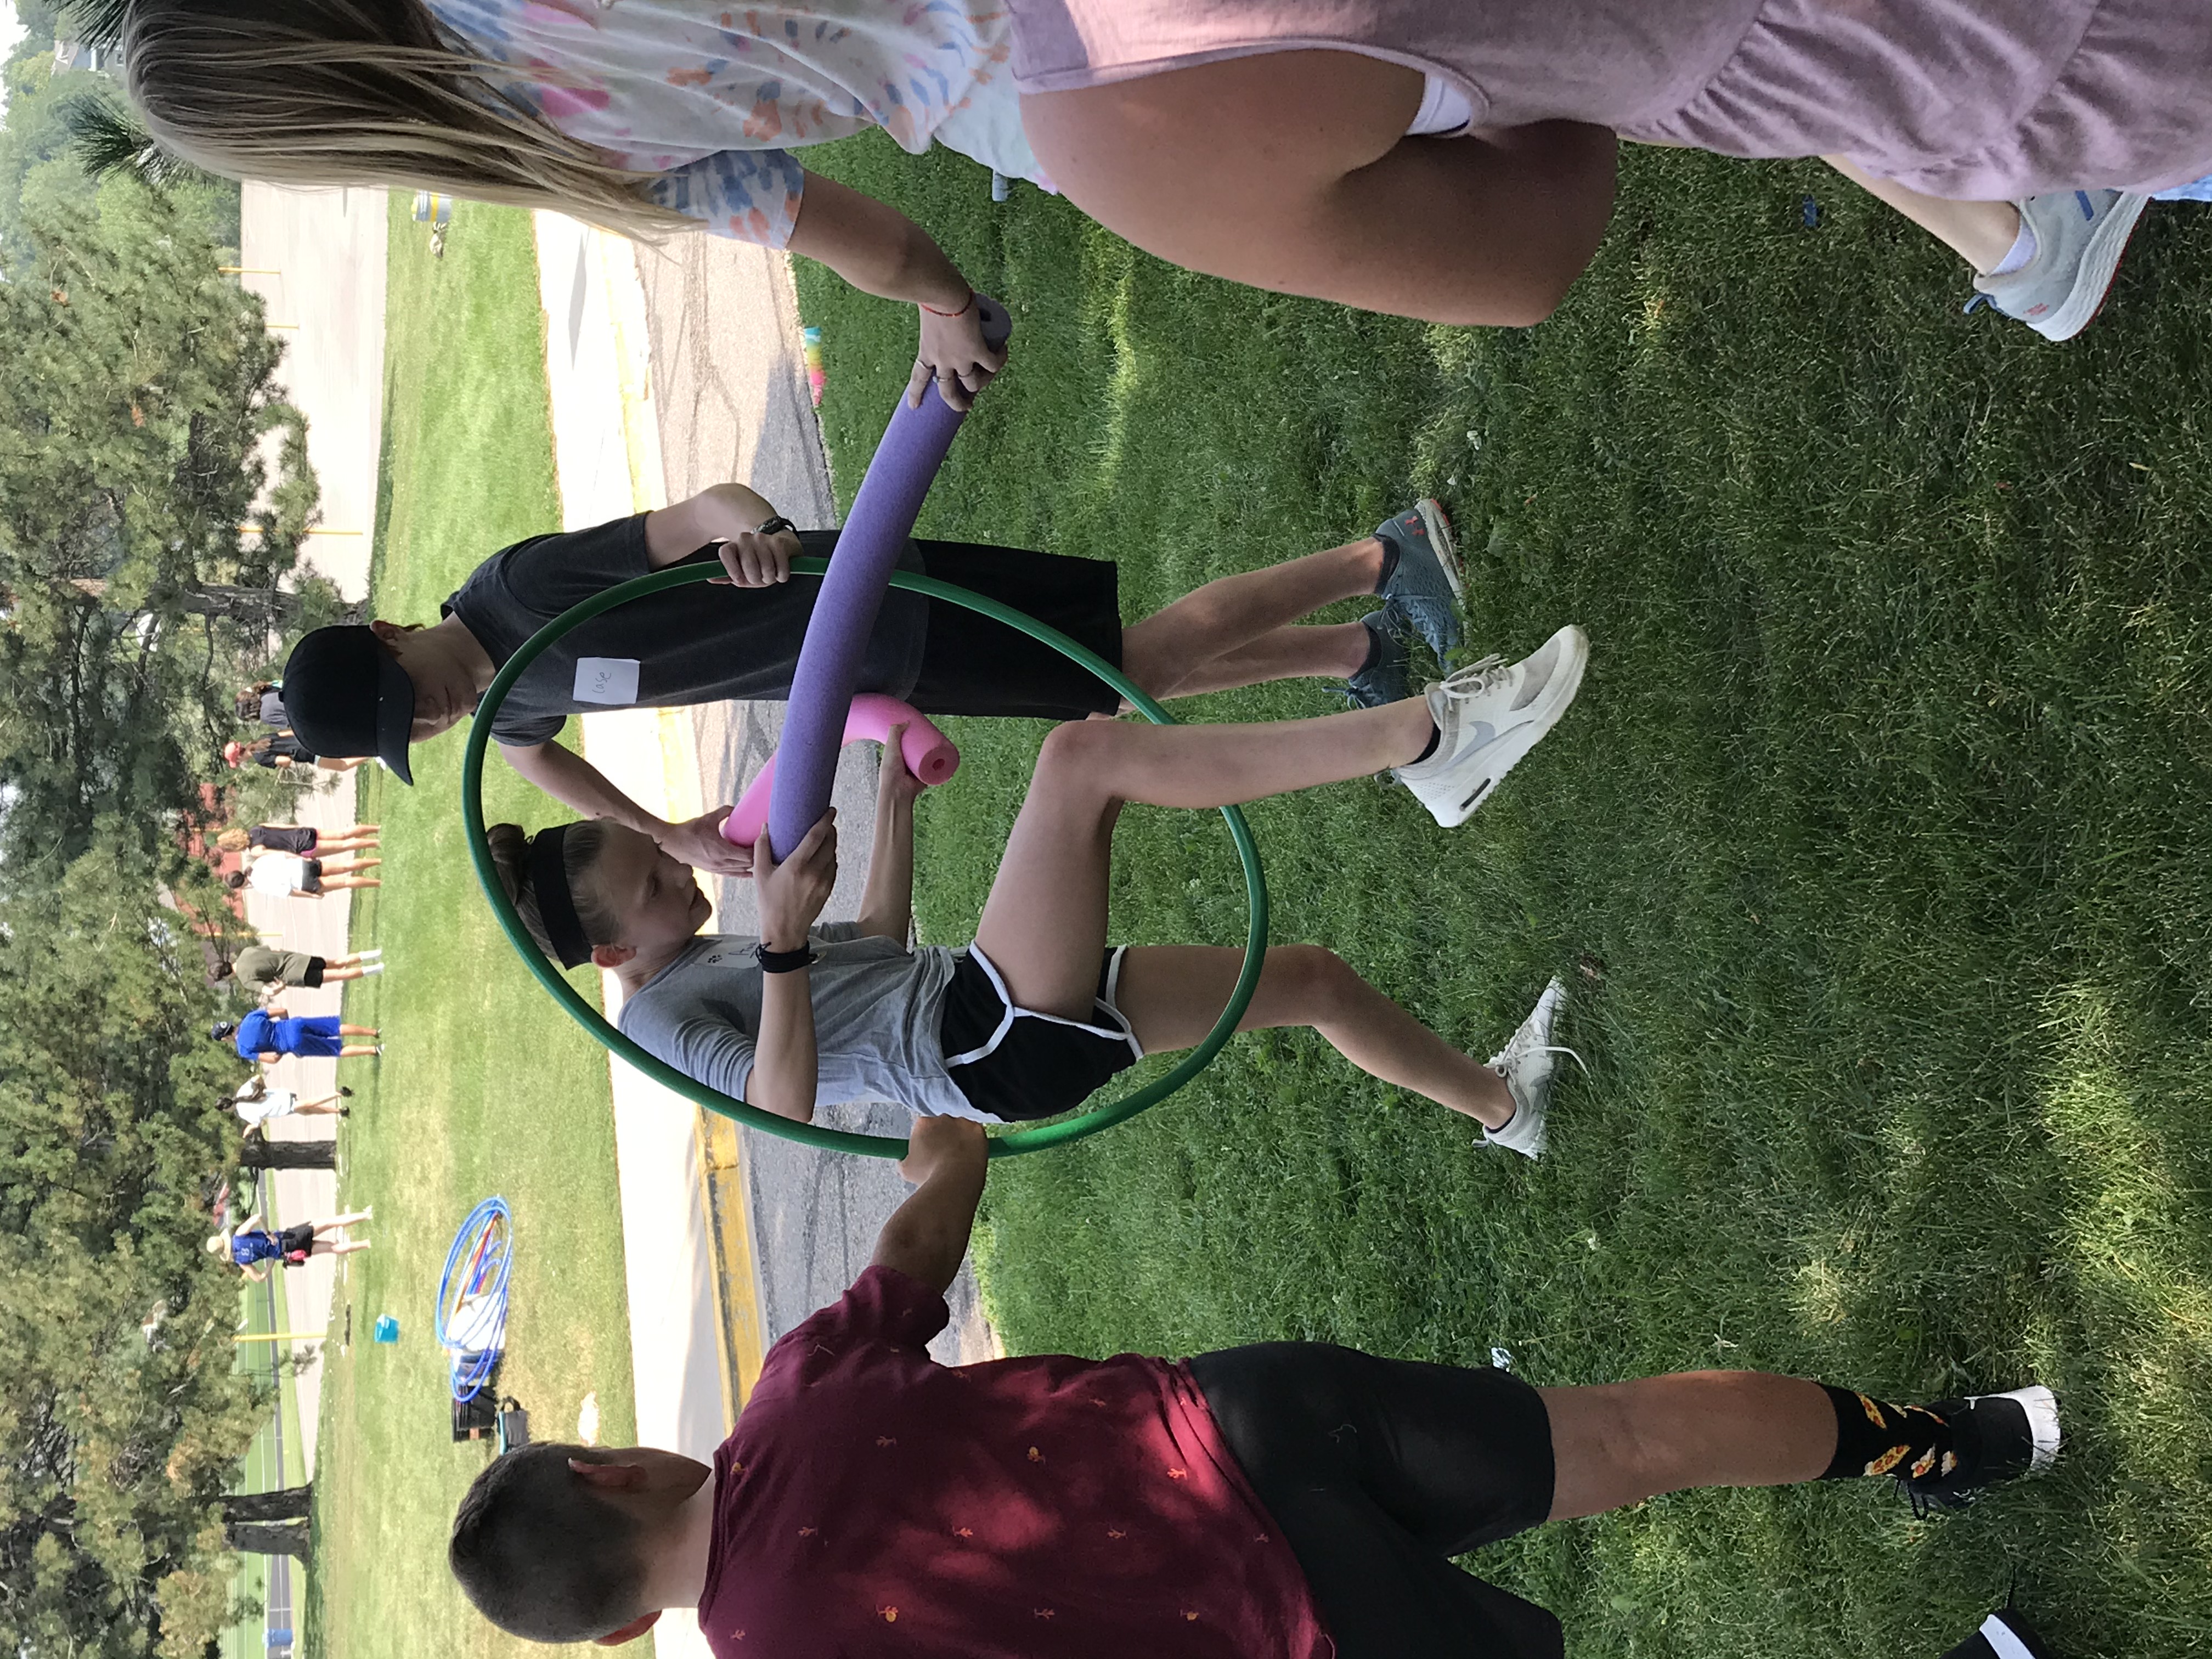 Eighth graders participate in team building/training